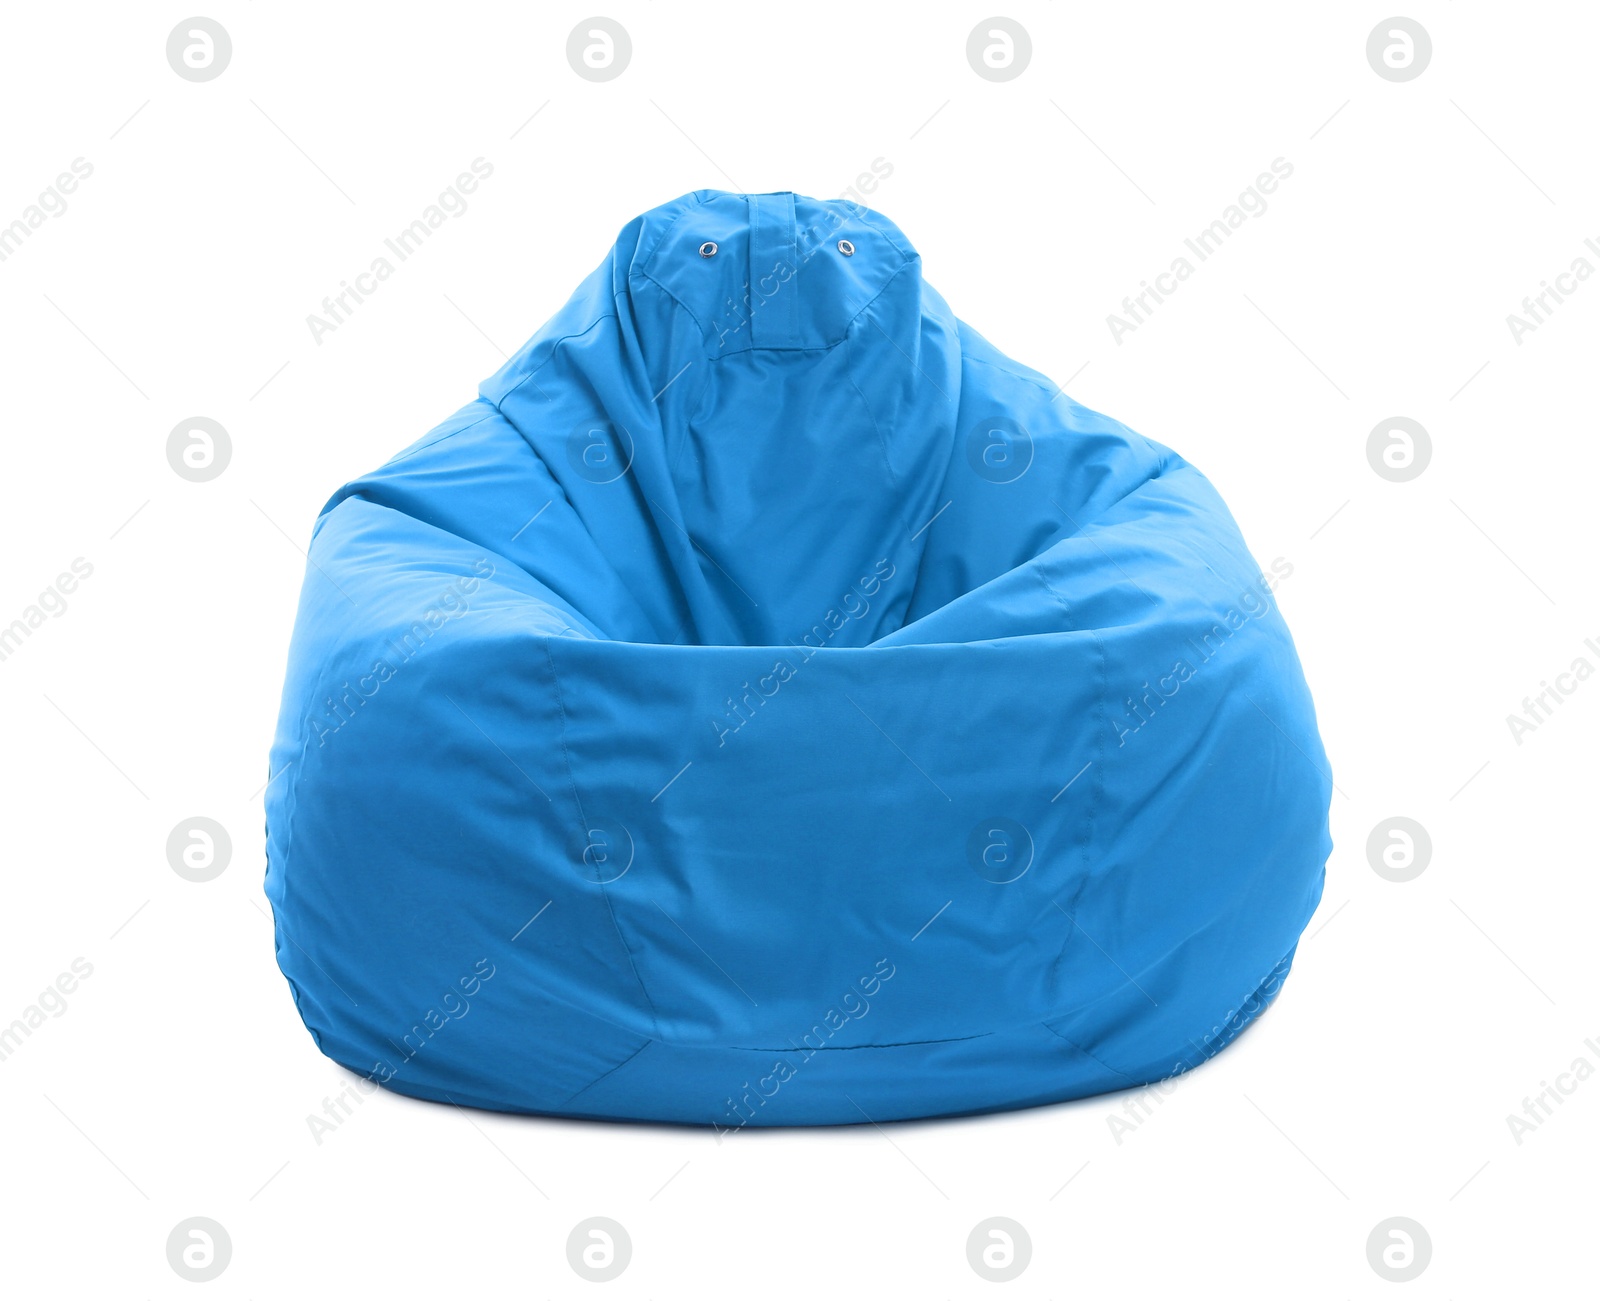 Image of One light blue bean bag chair isolated on white